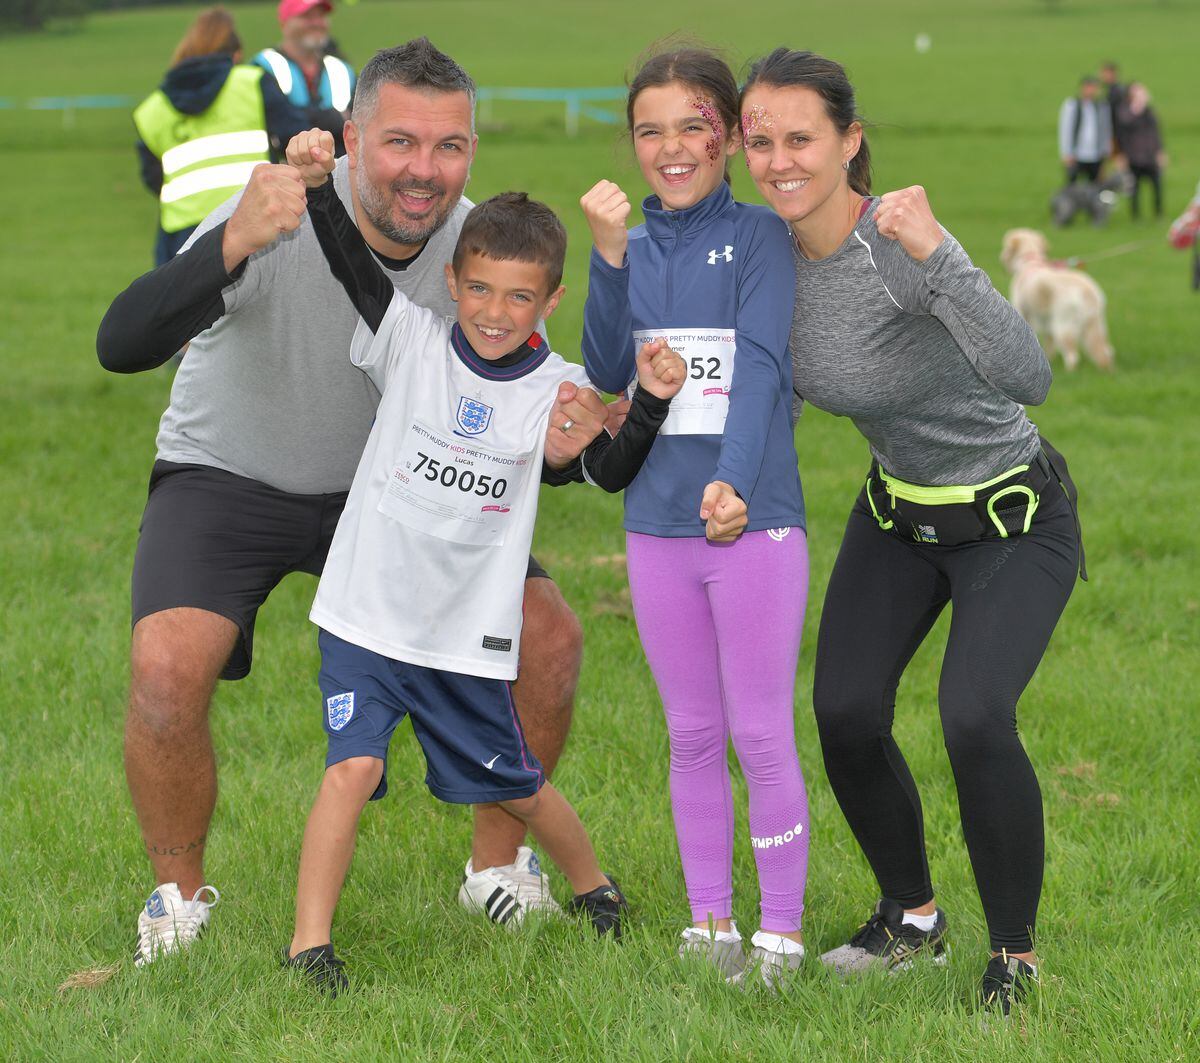 The Bagley family from Cannock ahead of the Pretty Muddy event